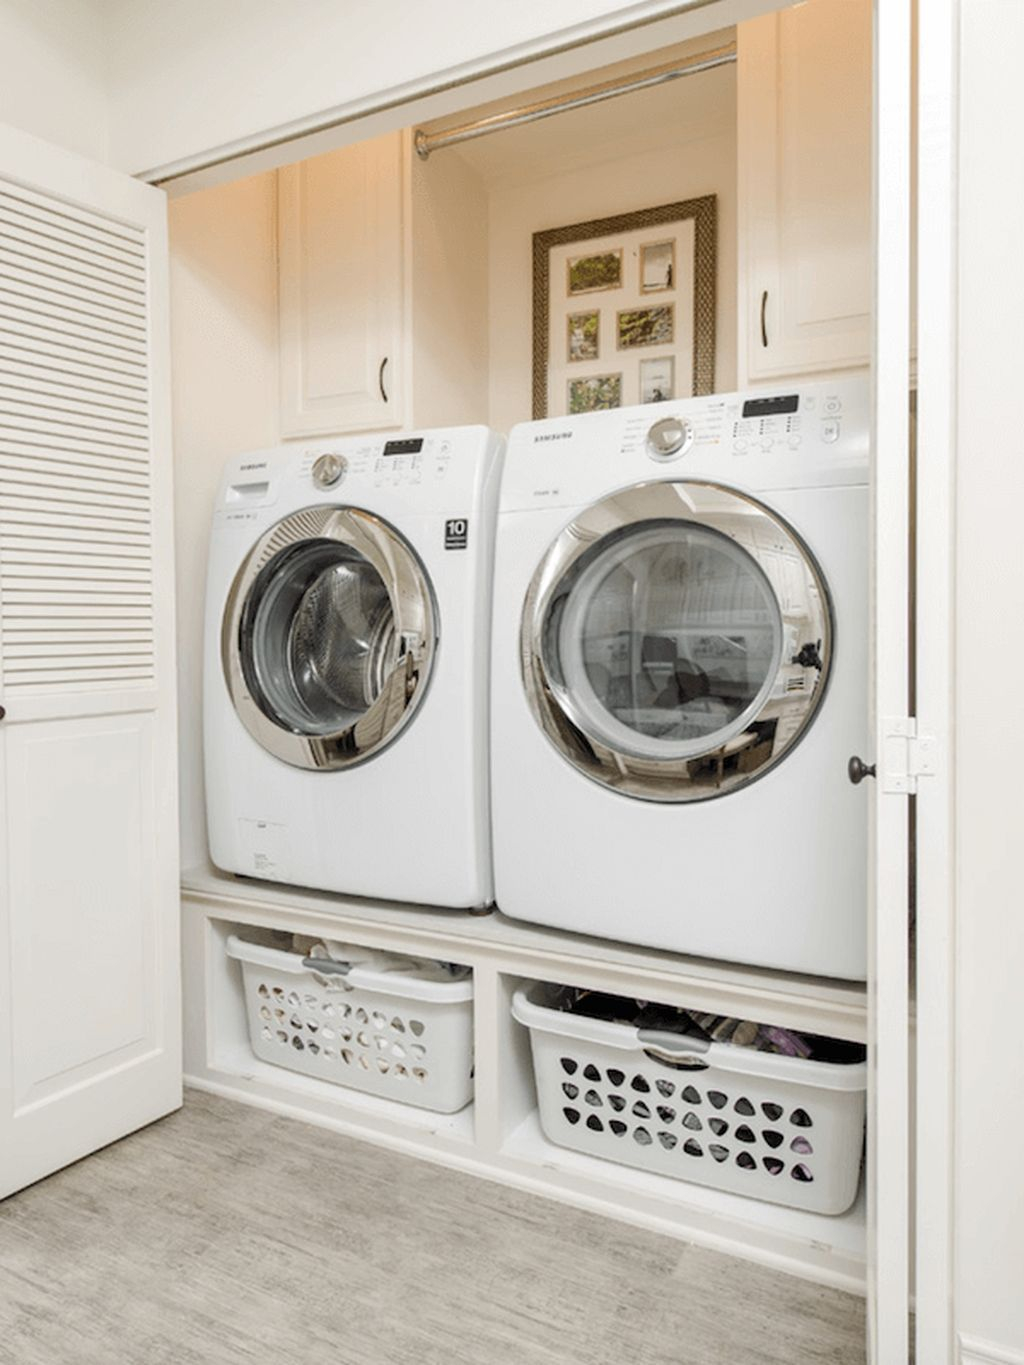 Favored Laundry Room Organization Ideas To Try 01